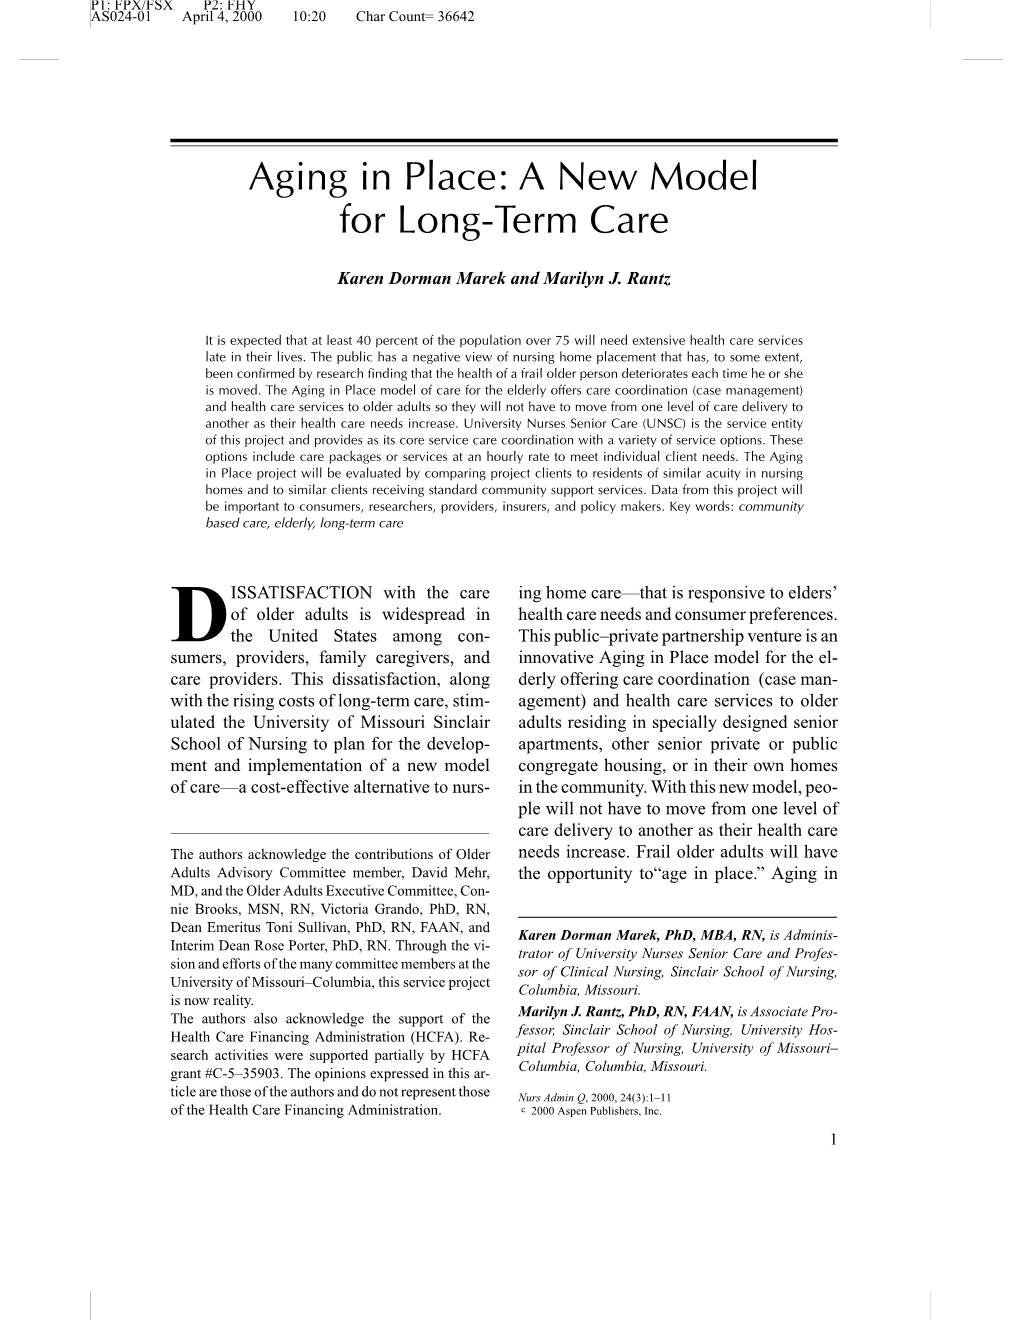 Aging in Place: a New Model for Long-Term Care